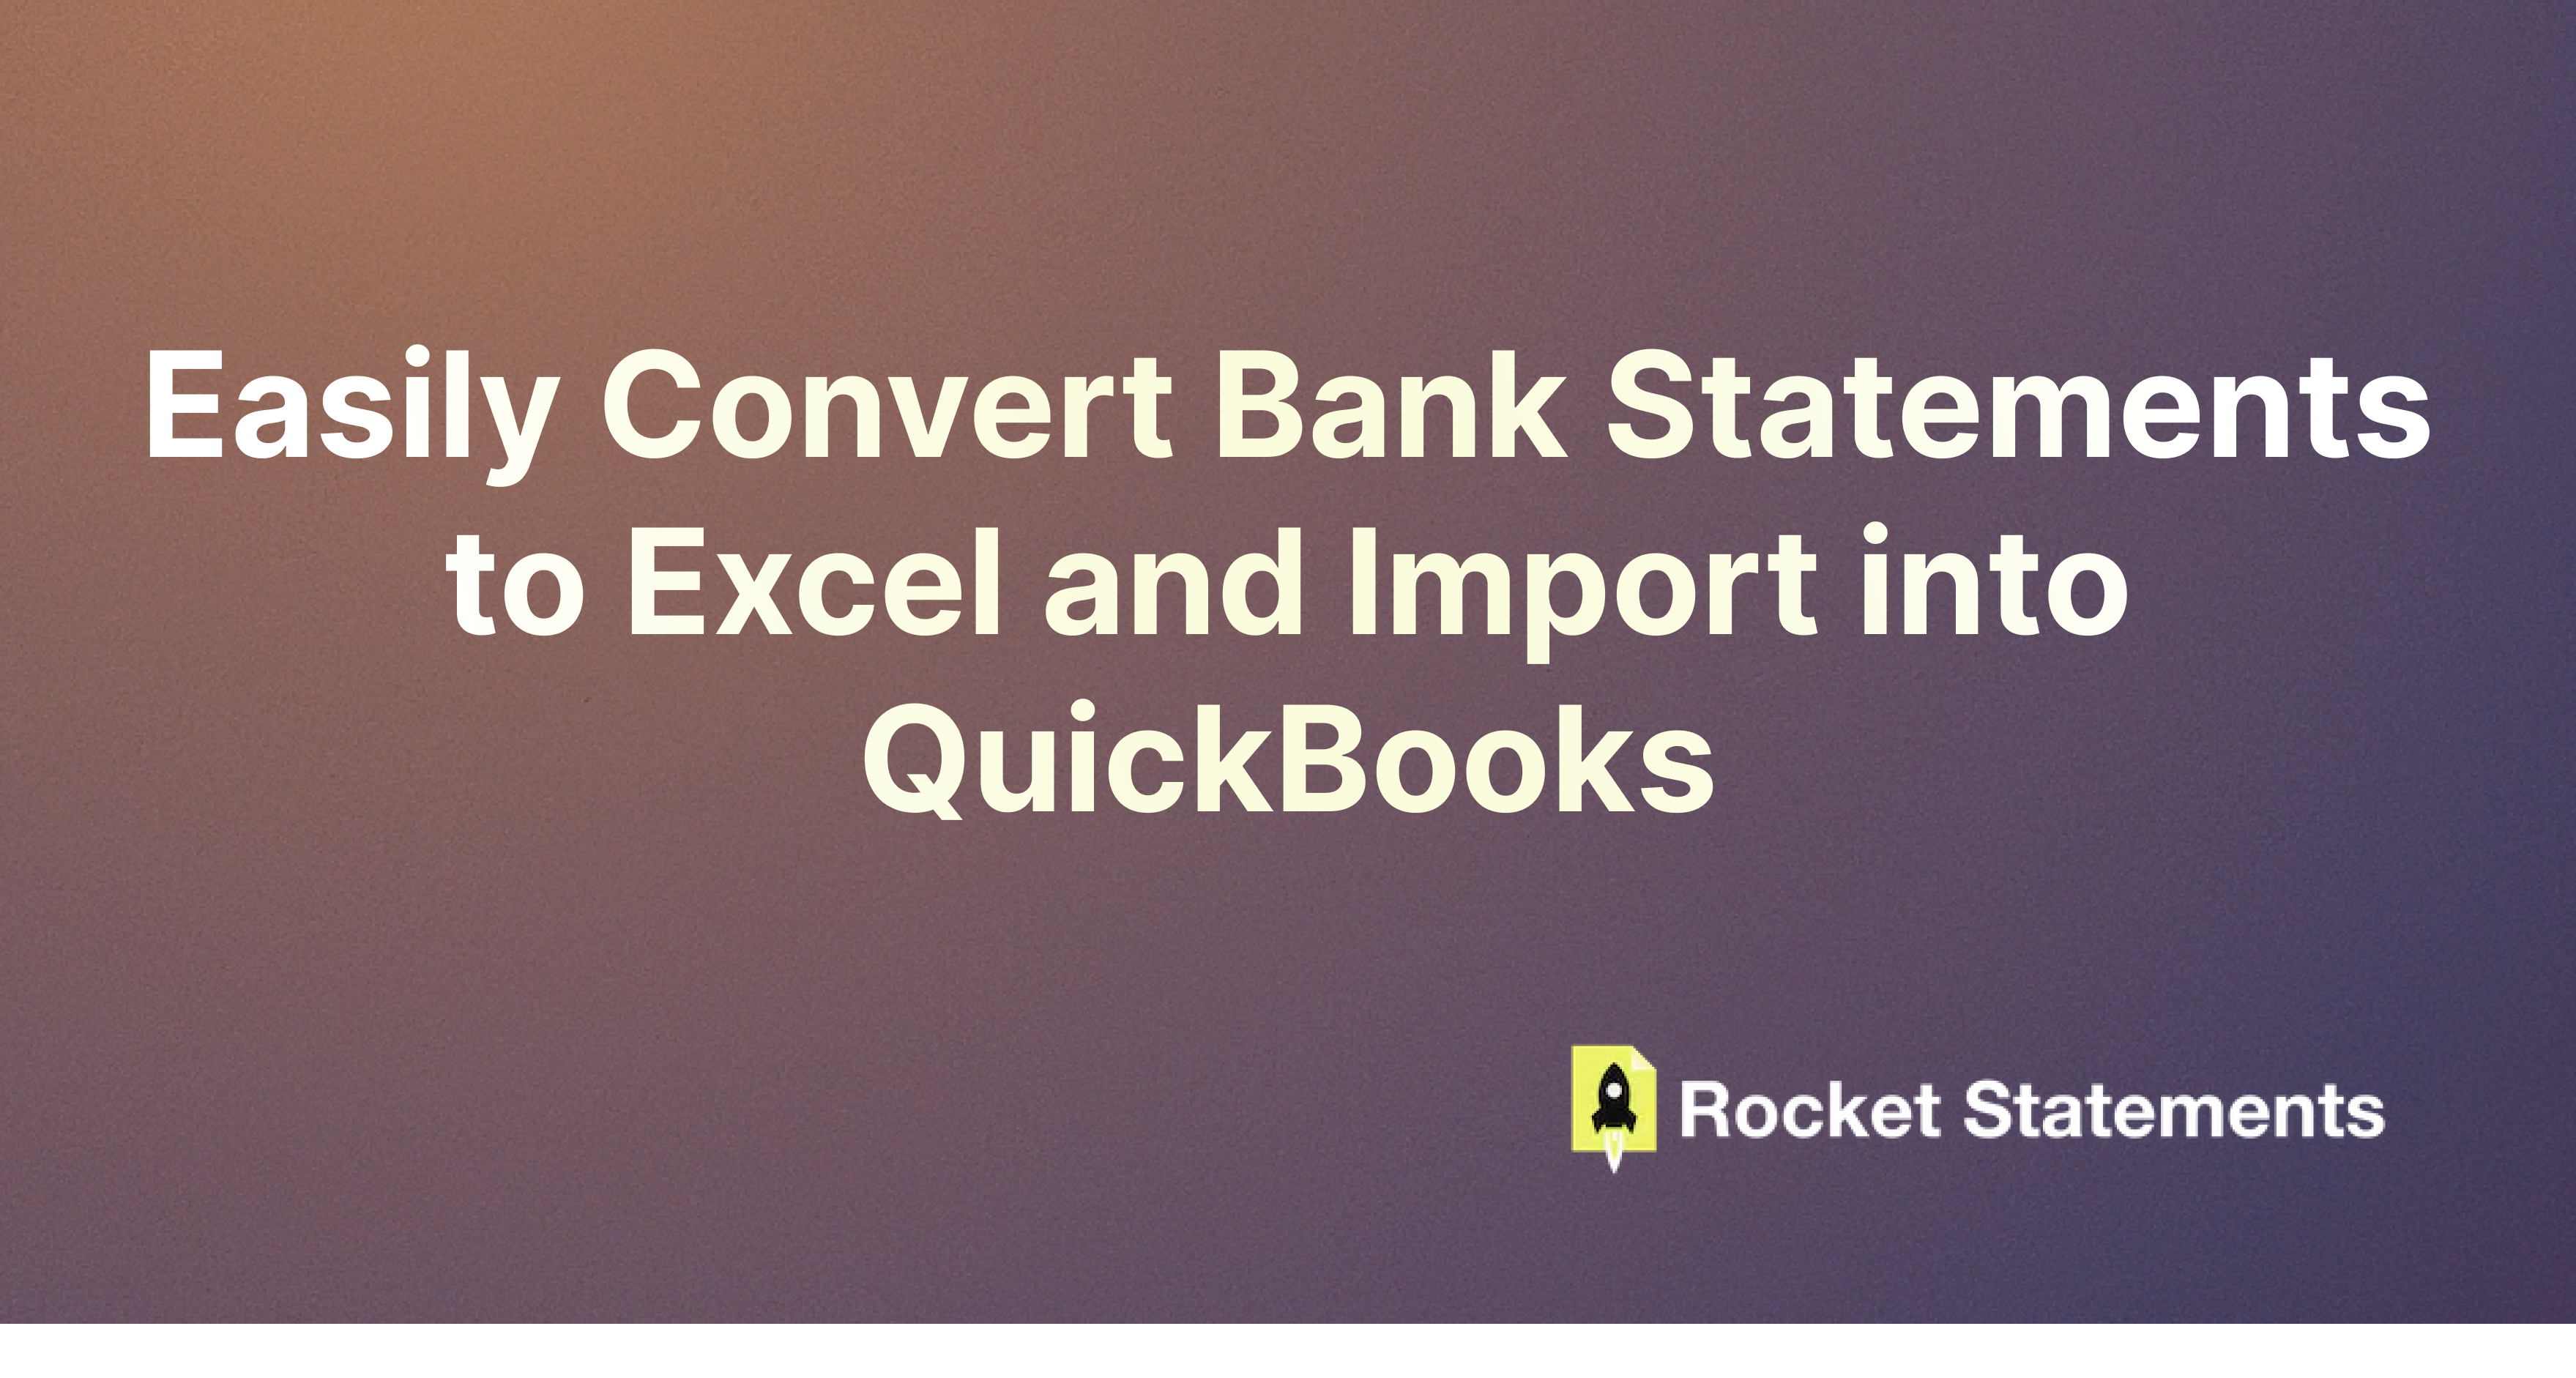 Easily Convert Bank Statements to Excel and Import into QuickBooks